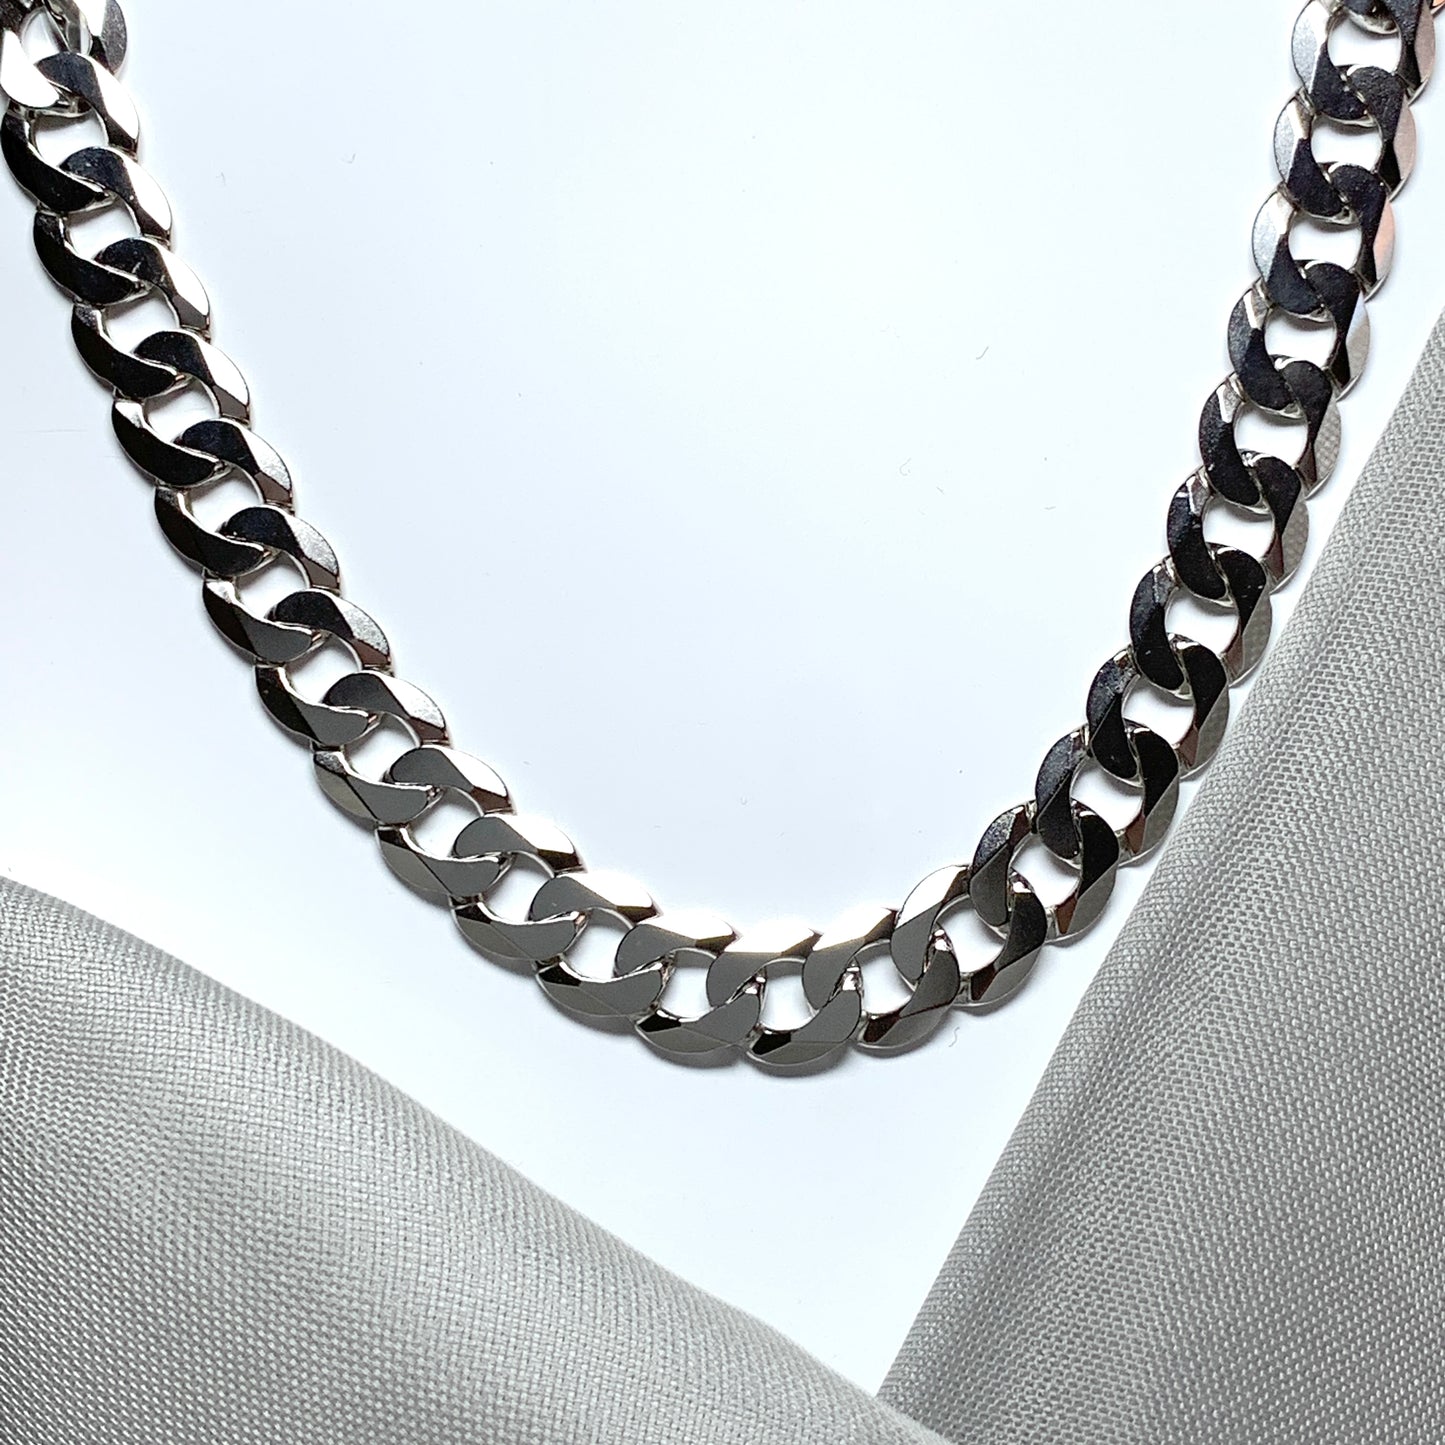 Men's solid sterling silver curb necklace 22 inches